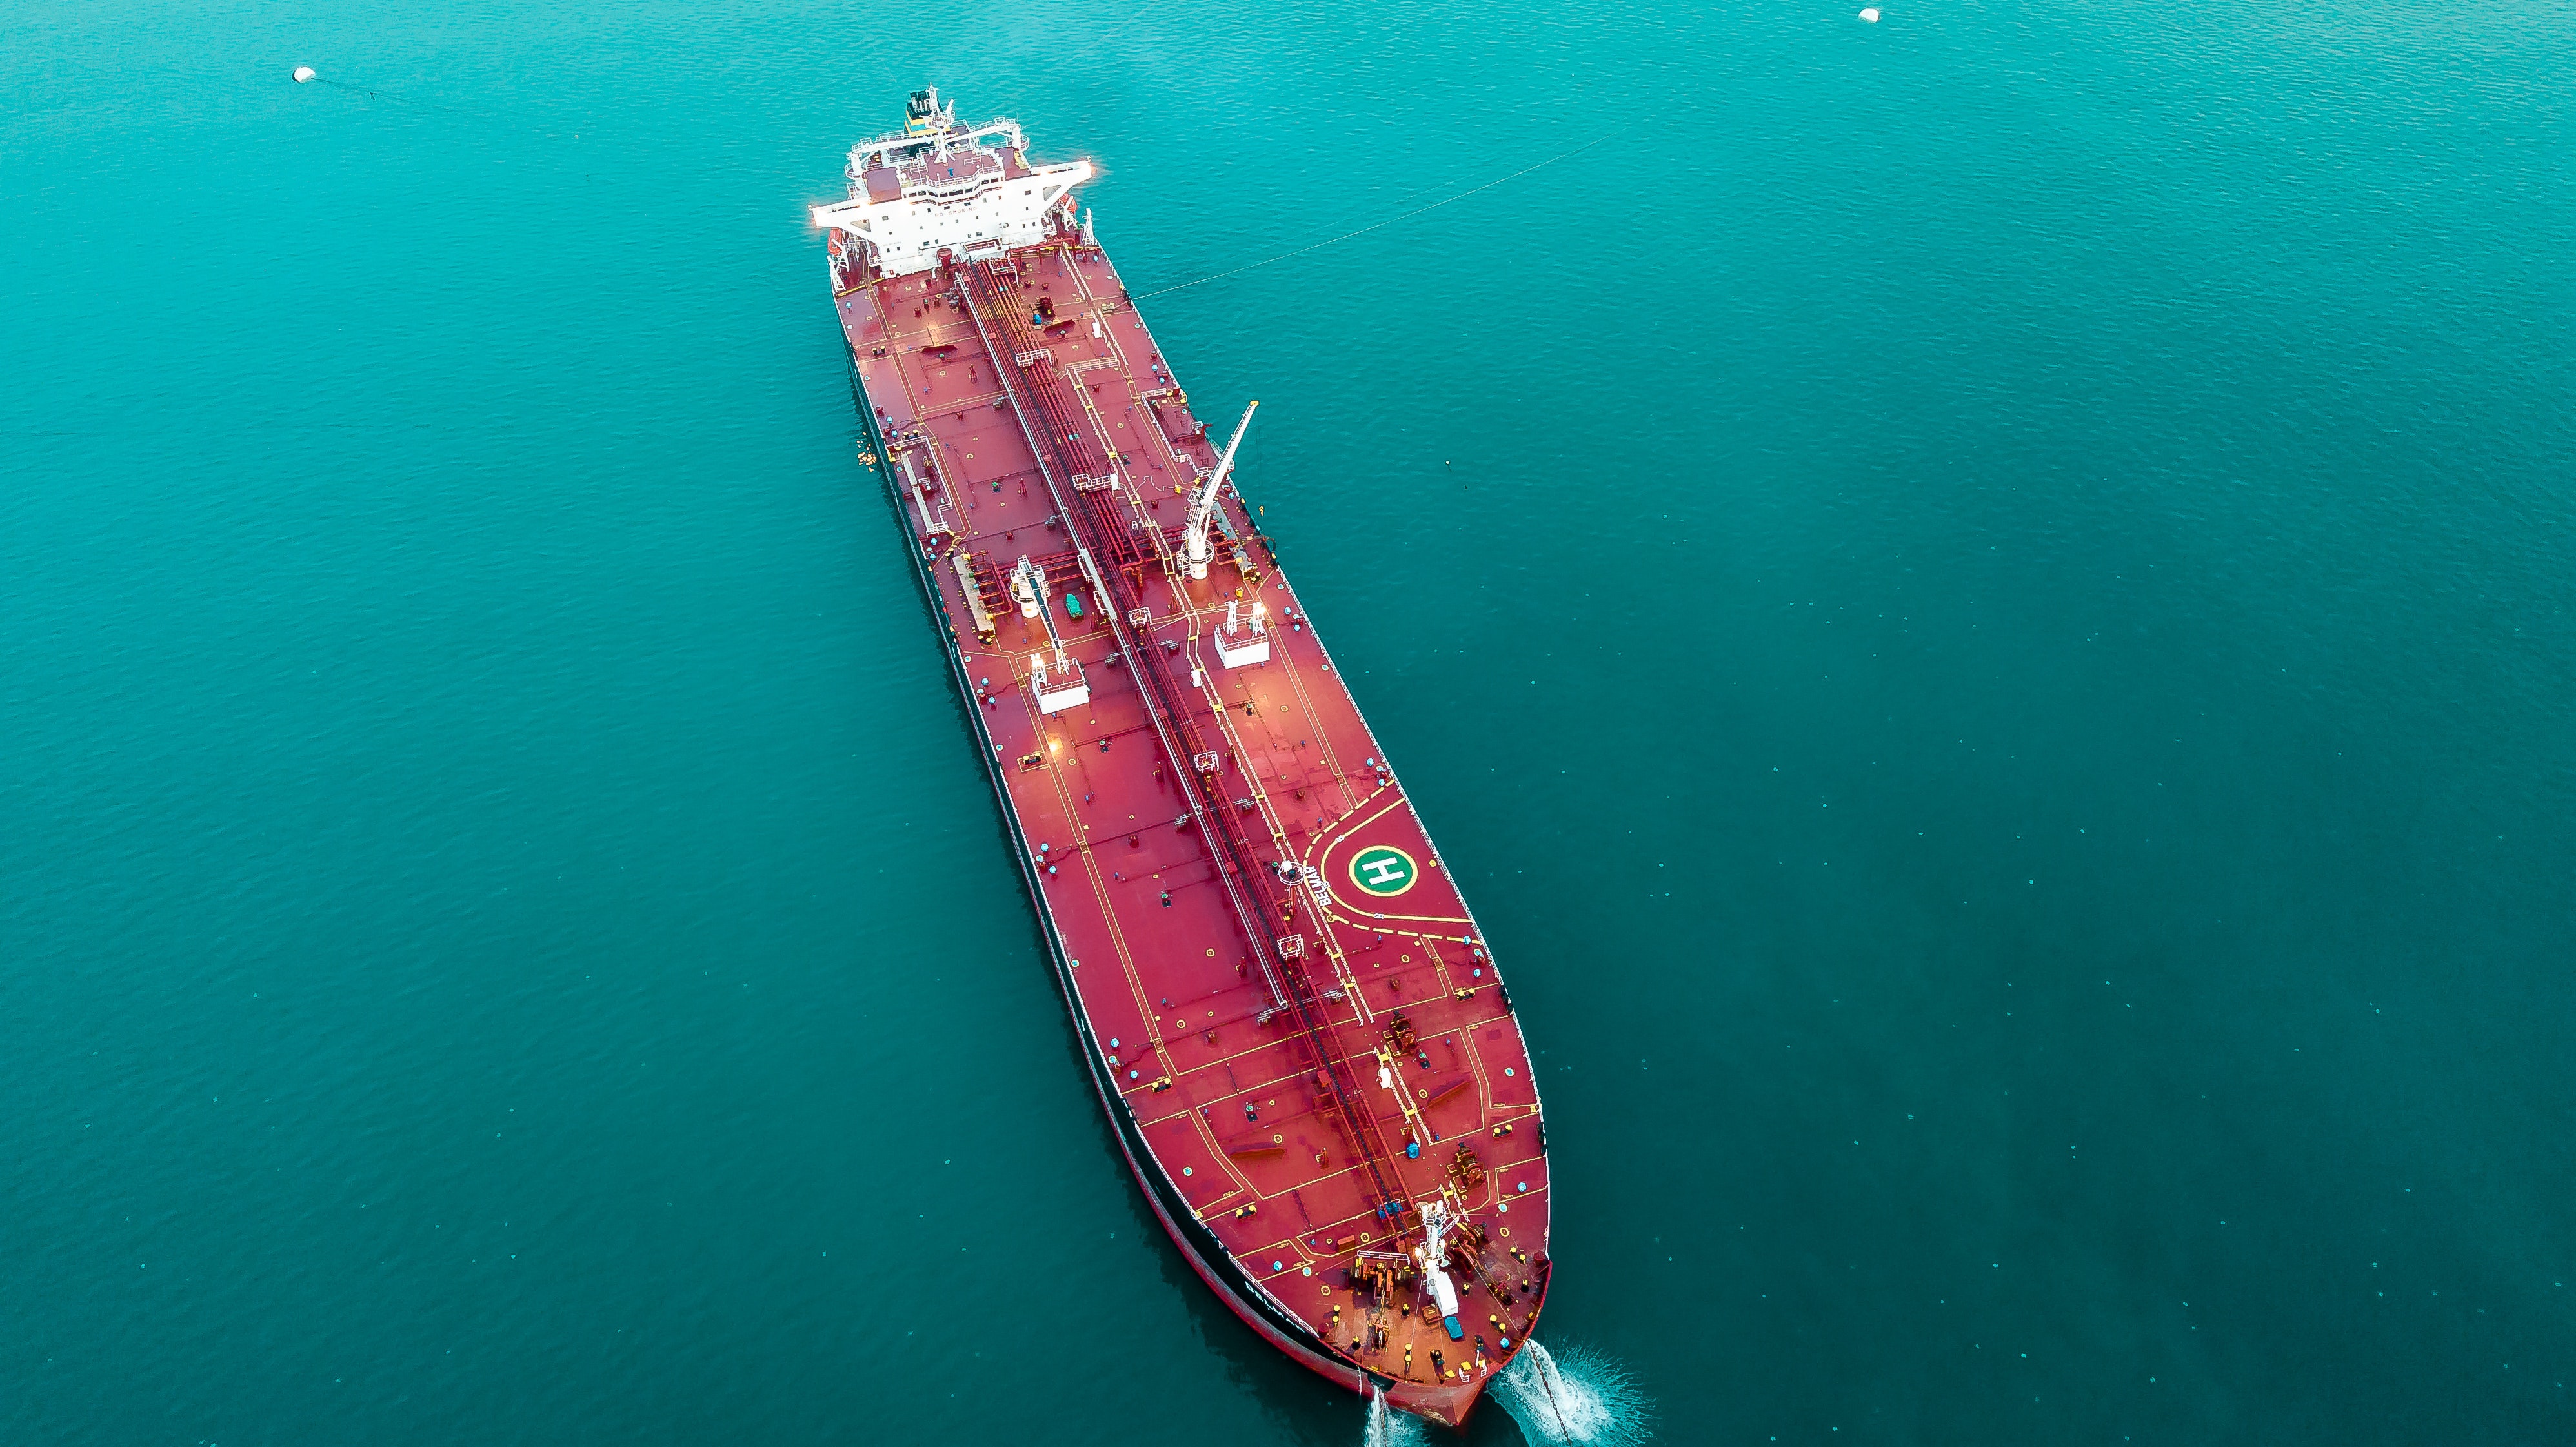 <p>The Seawise Giant was a ULCC supertanker, and the longest self-propelled ship in history. It was built between 1974 and 1979 by Sumitomo Heavy Industries in Japan.</p>